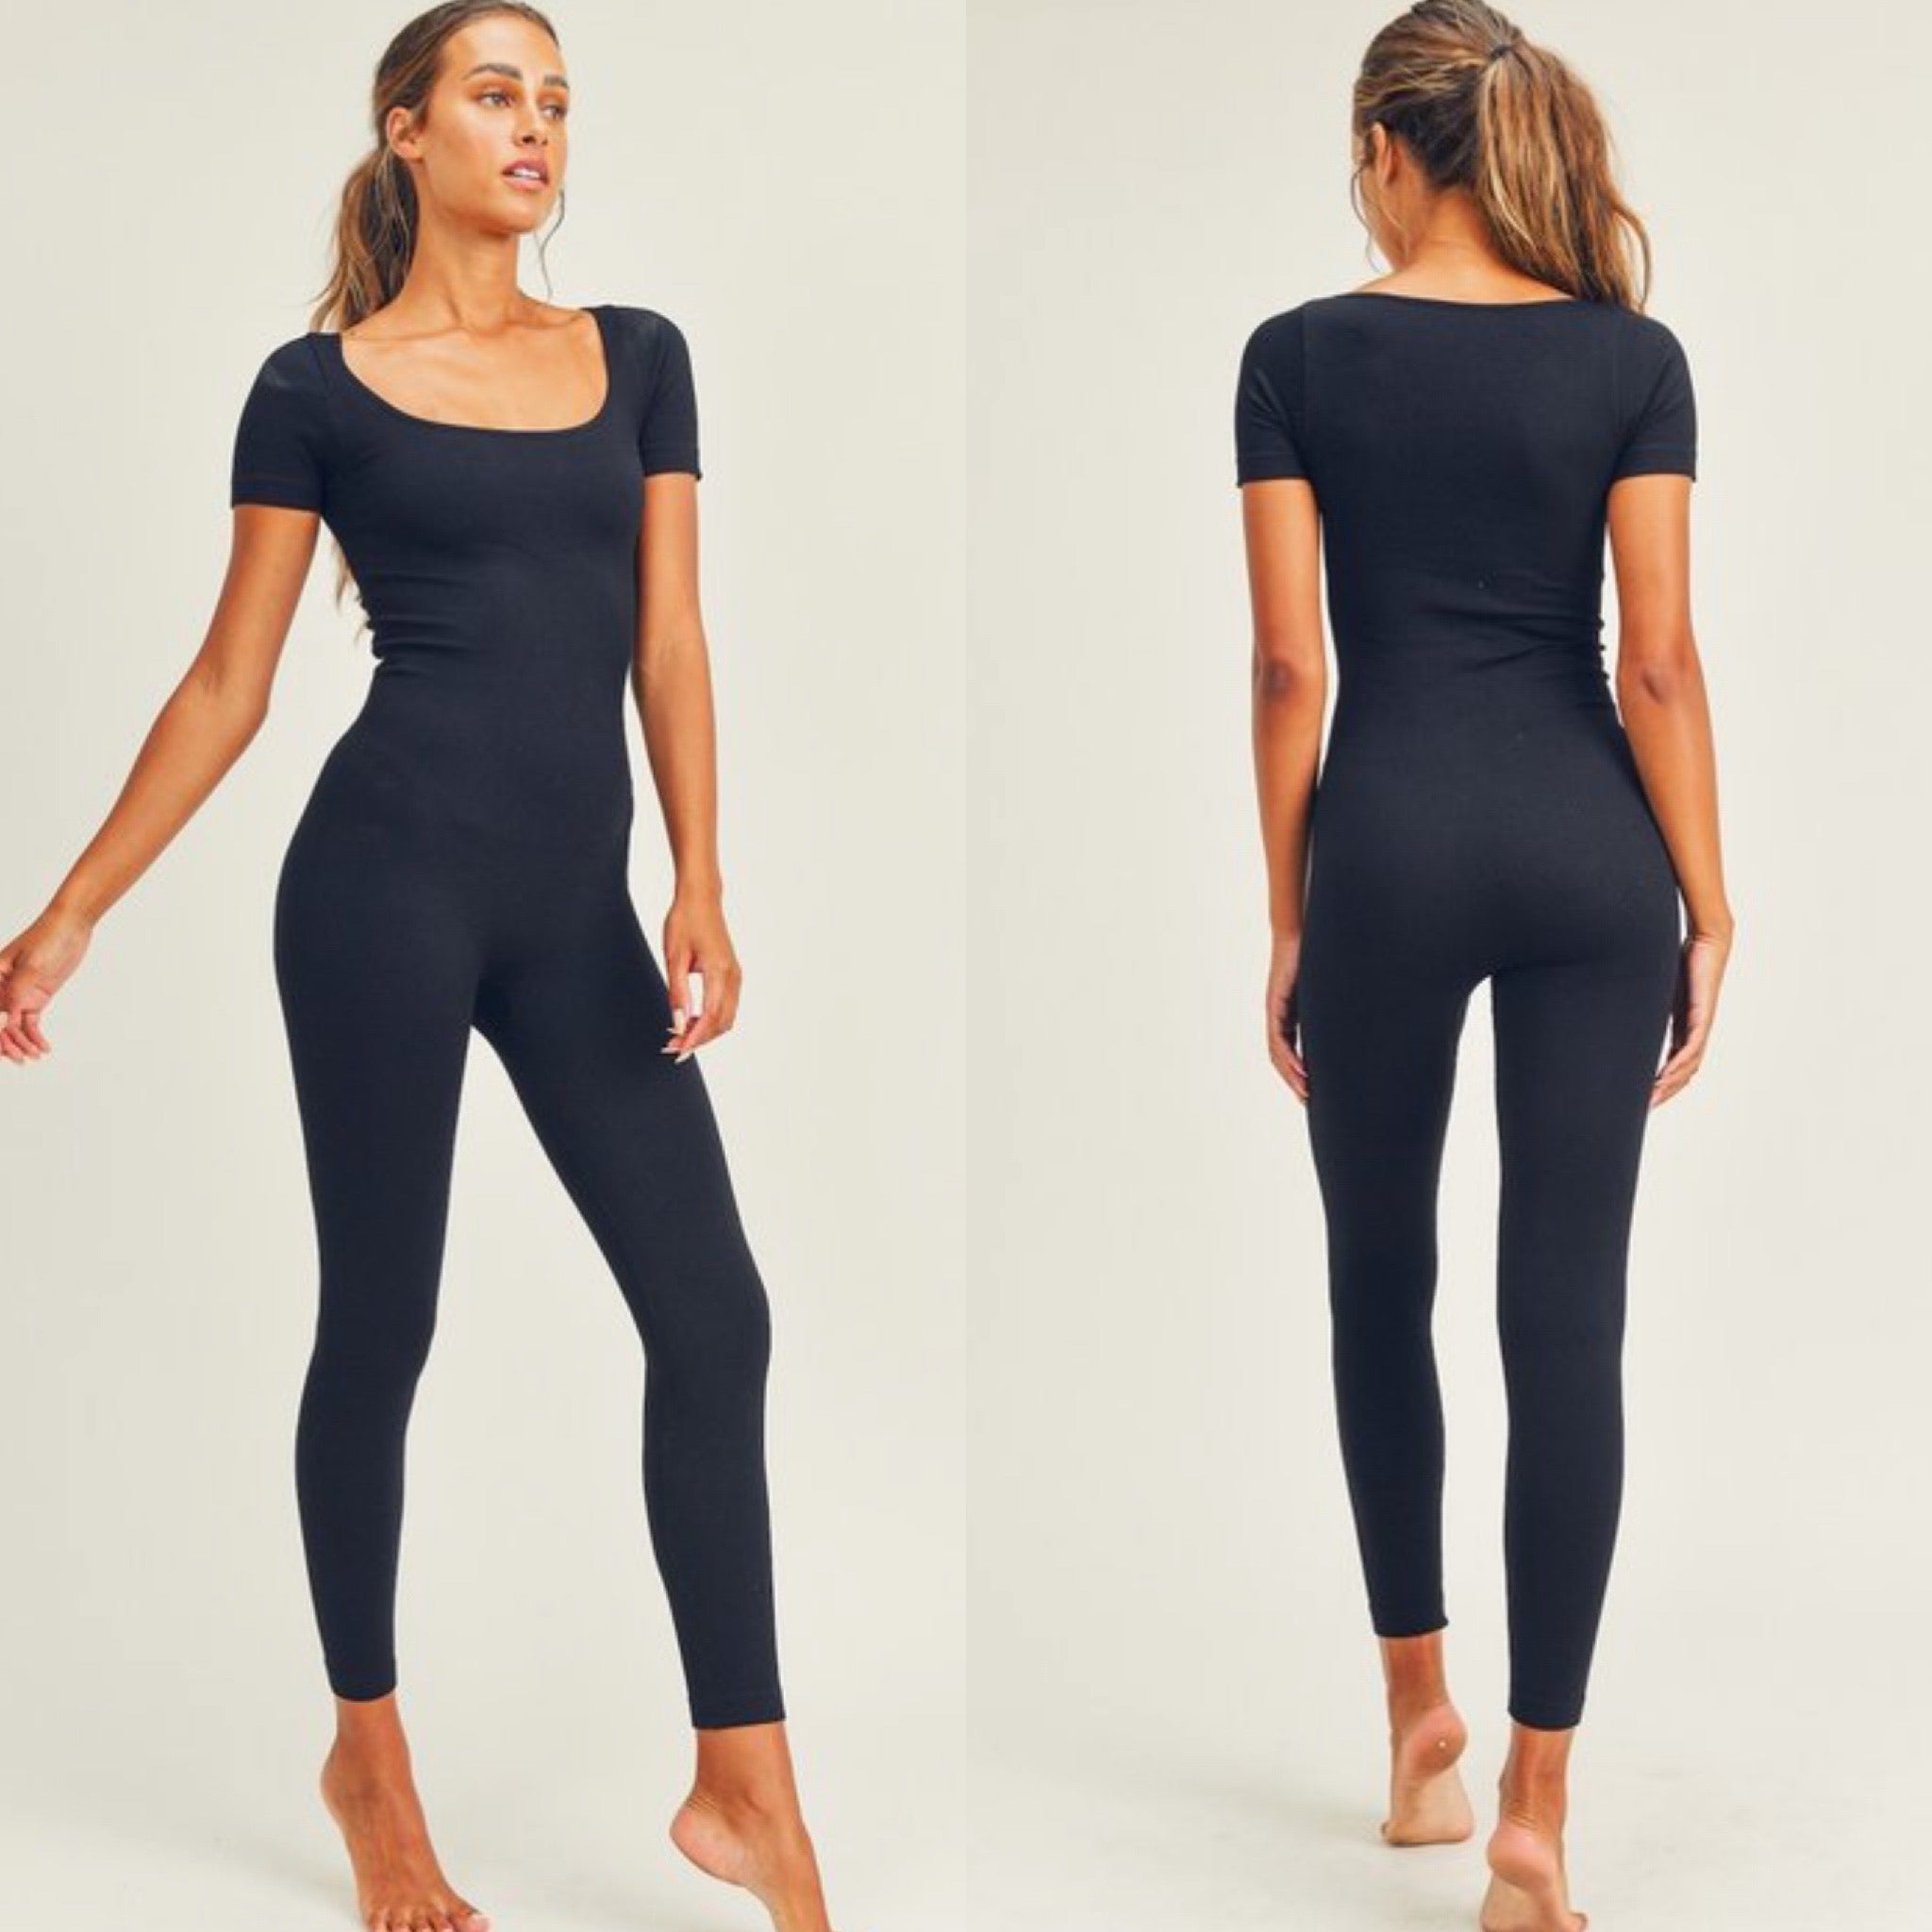 The “KIMS” Cap Sleeve Seamless Ribbed Jumpsuit